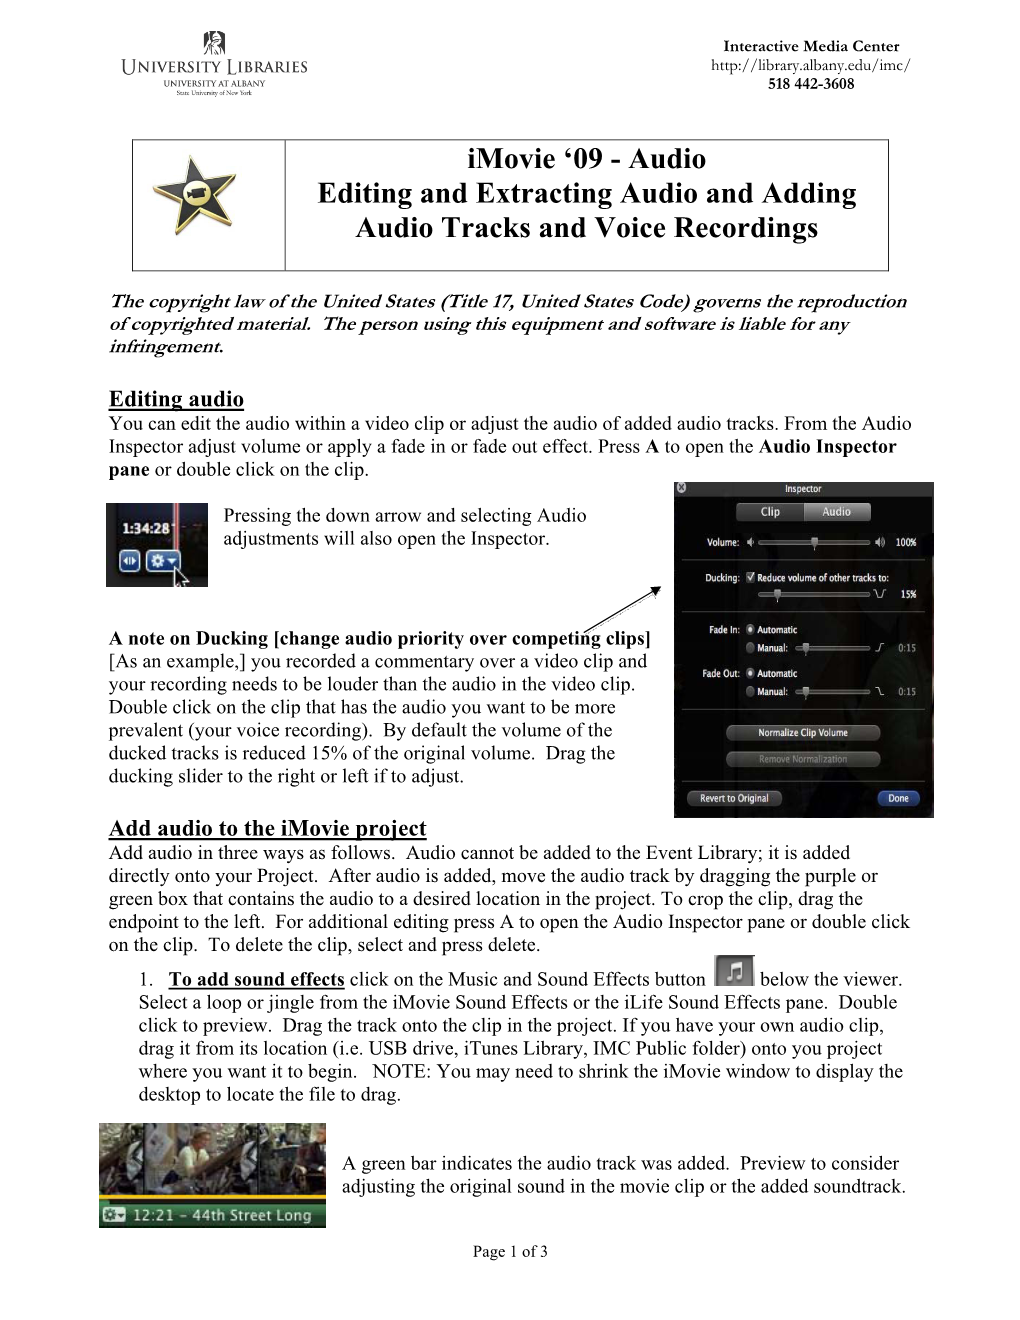 Imovie ‘09 - Audio Editing and Extracting Audio and Adding Audio Tracks and Voice Recordings